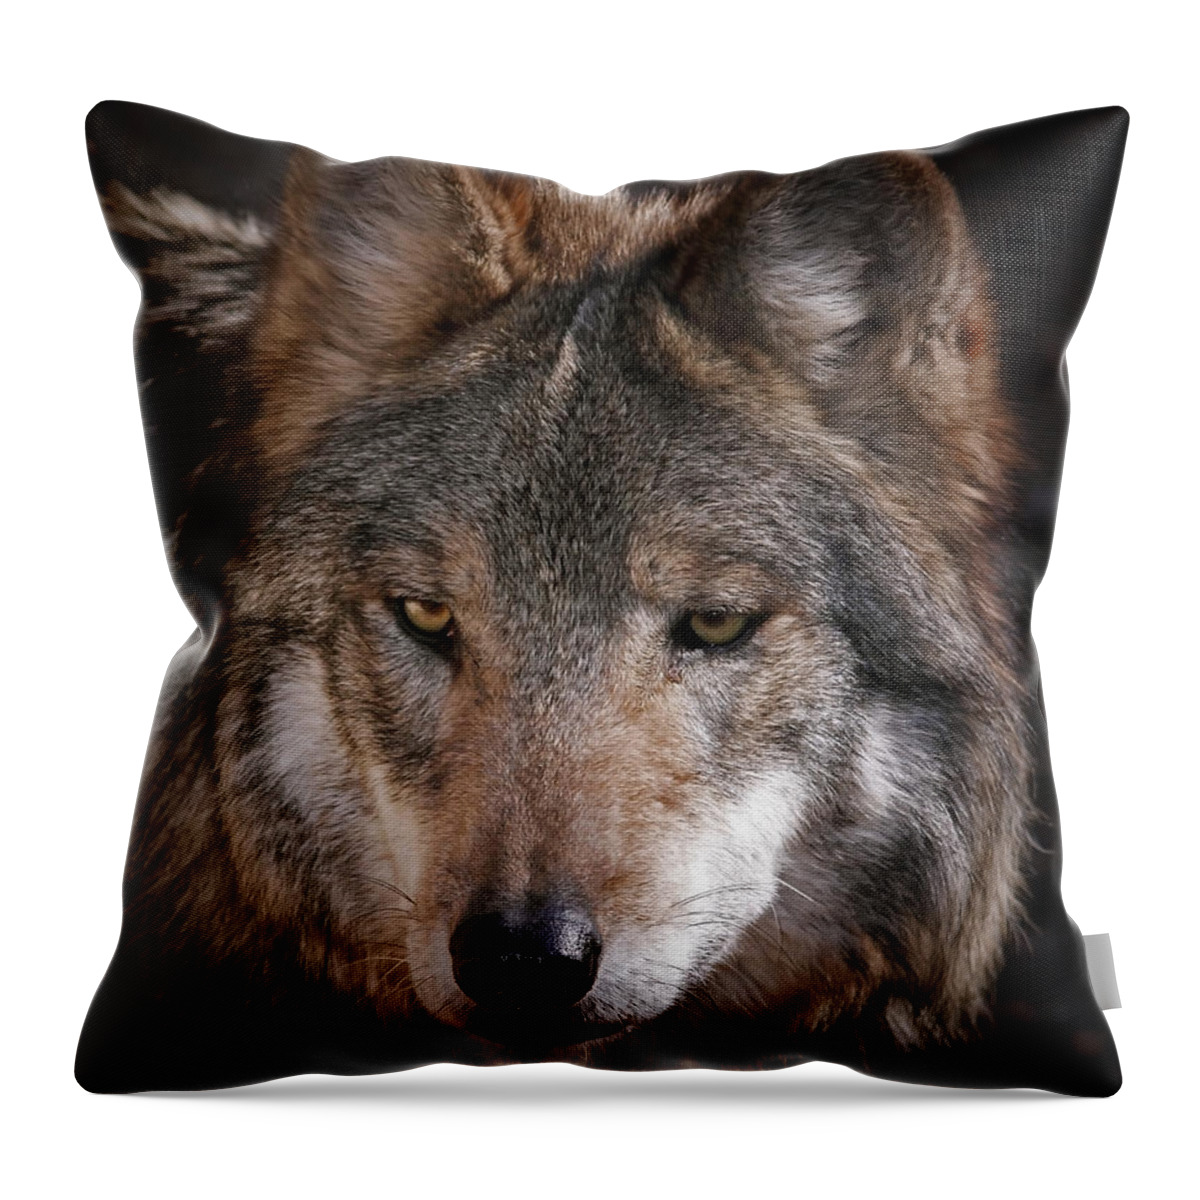 Wolf Throw Pillow featuring the photograph Curious Sancho by Elaine Malott